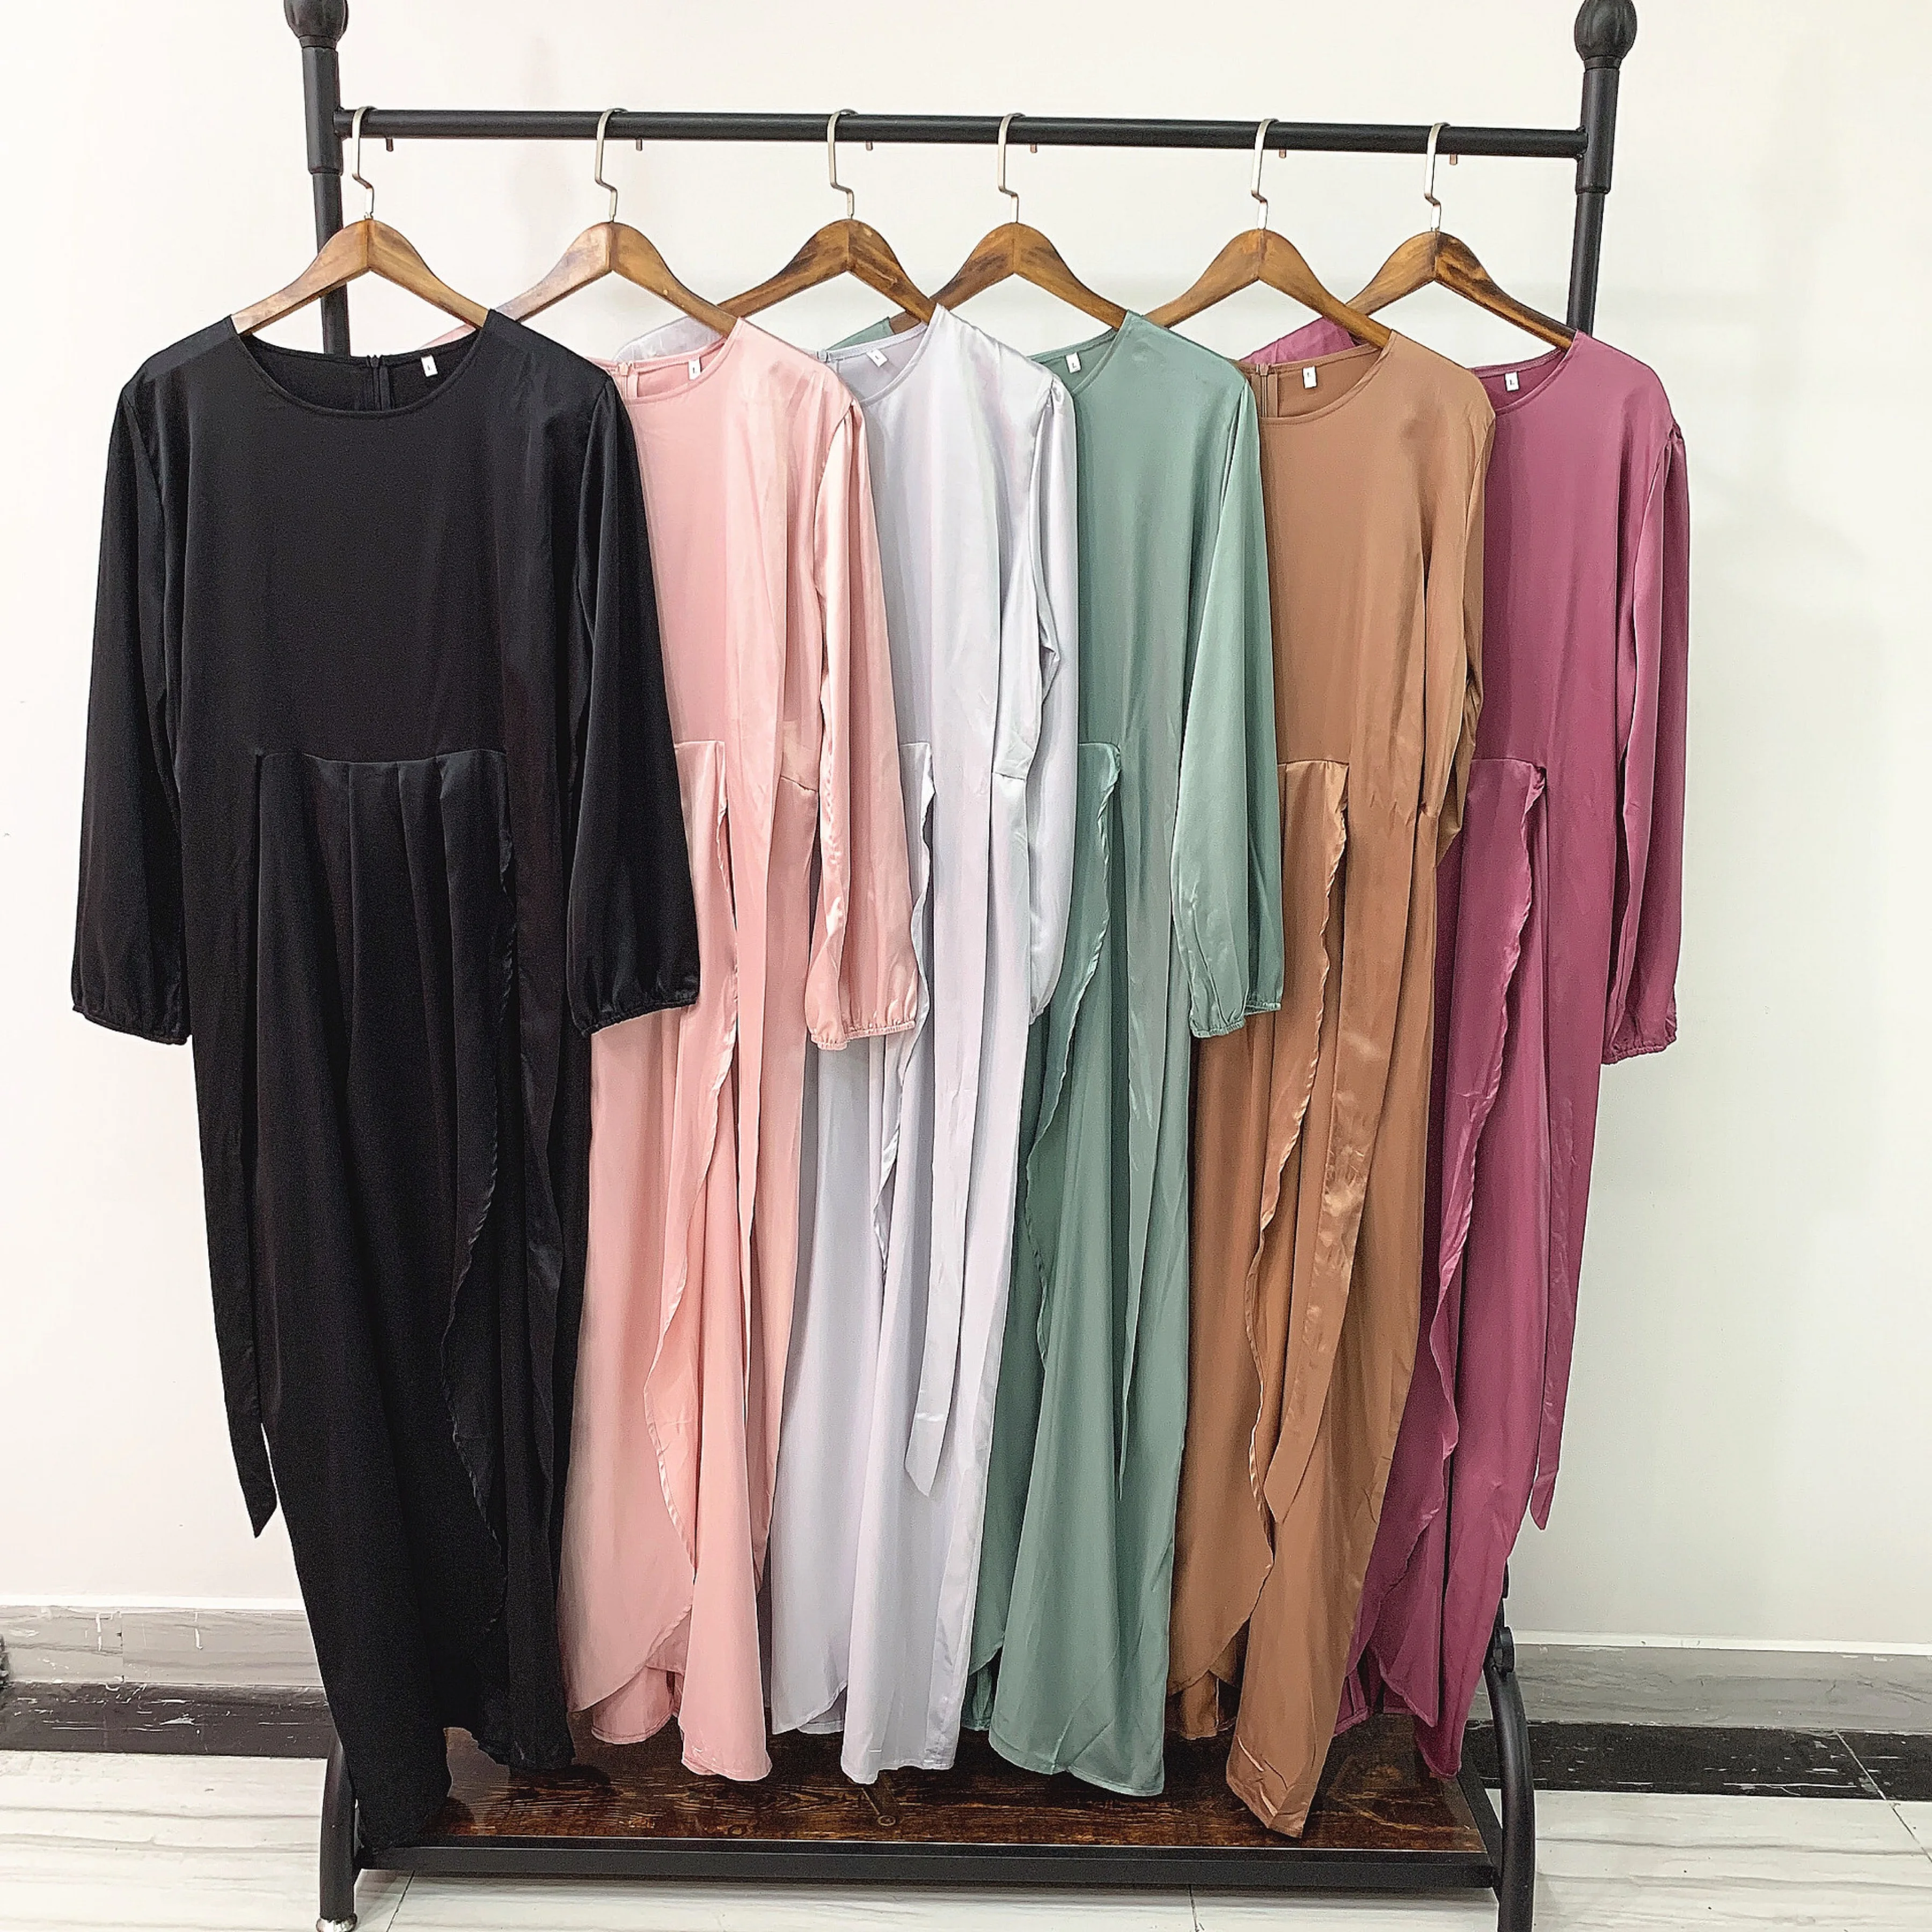 

2021 New Muslim Dress Hot selling Design Abaya Clothing For Women Modest Fashion Tie Belt Satin Dress Turkey Middle East, Customers' requirements